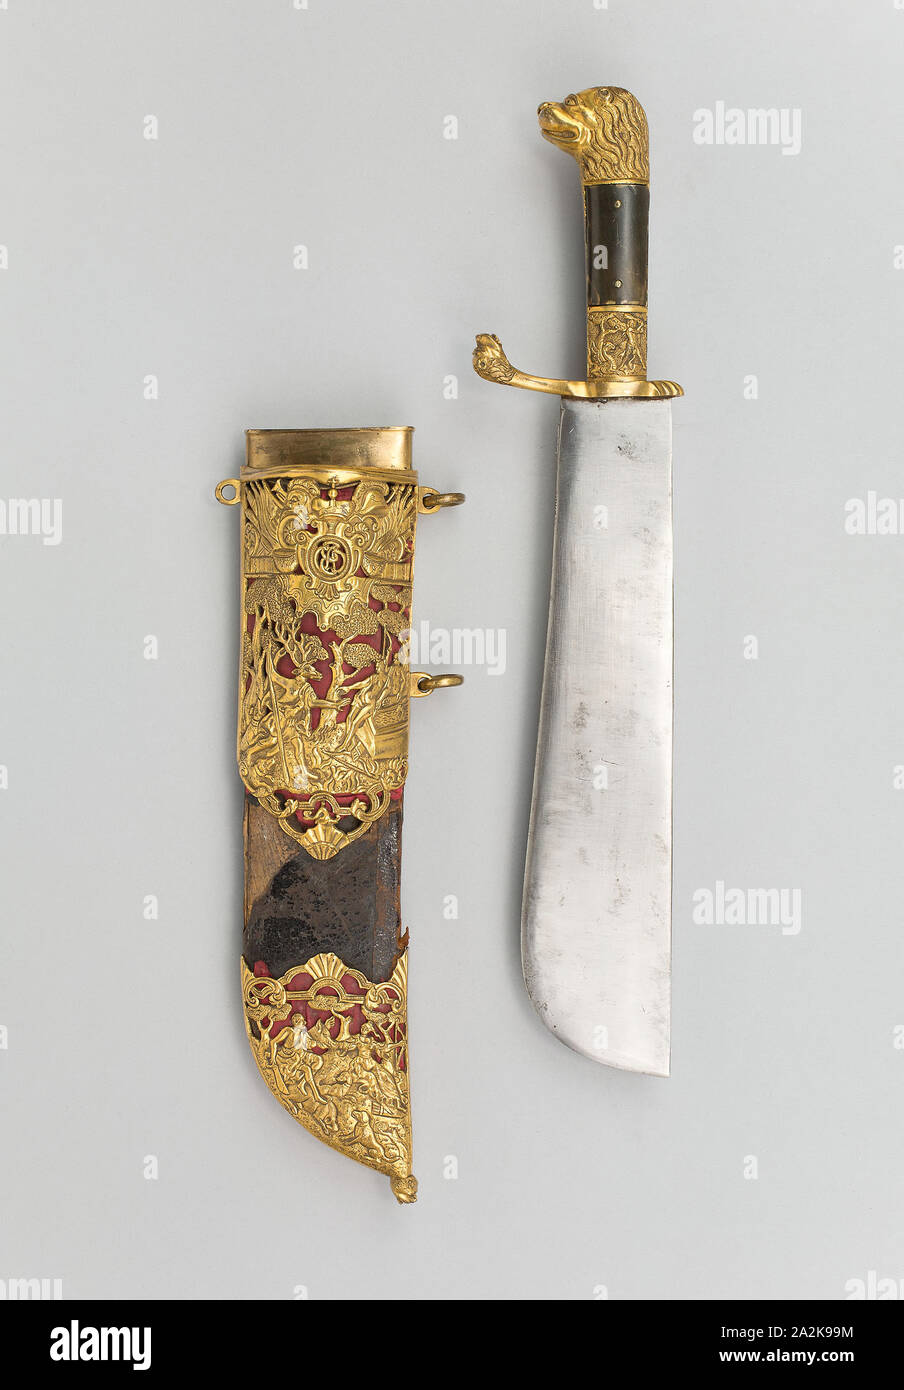 Hunting Cleaver (Waidpraxe) of Ernst August II Konstantin, Duke of Saxe-Weimar-Eisenach, 1755/58, German, Germany, Steel, bronze, gilding, horn, wood, leather, and silk, Cleaver: Overall L. 36.2 cm (14 1/4 in Stock Photo